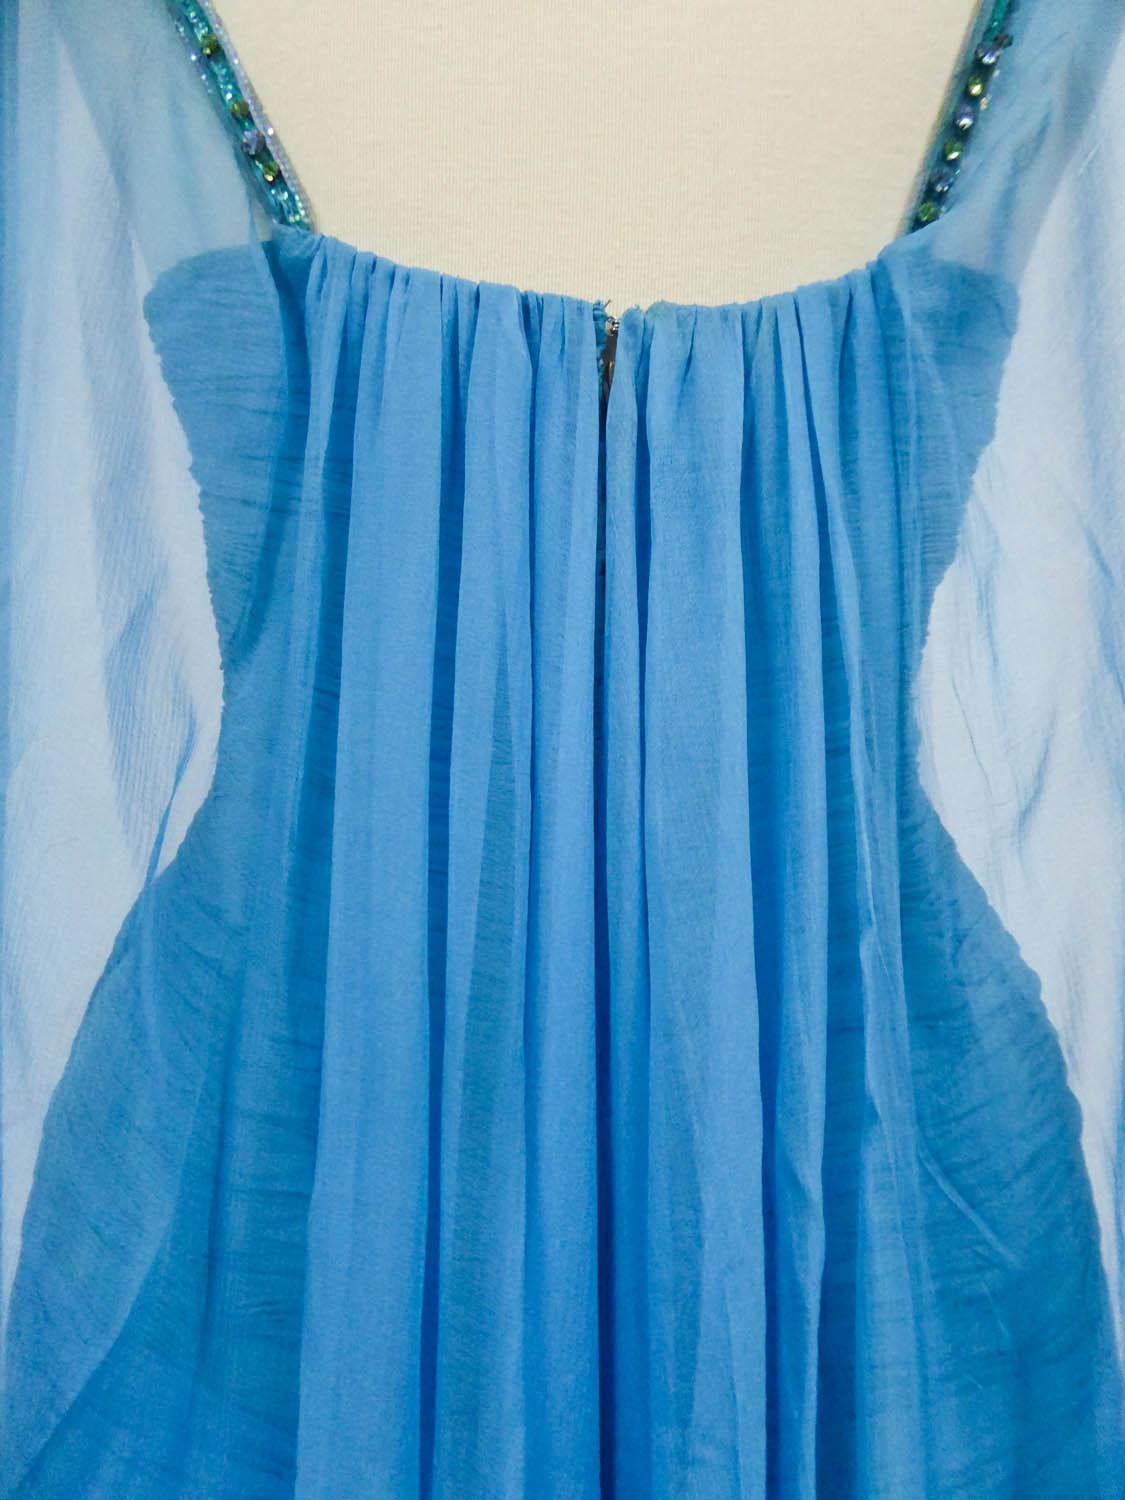 A French Carven Couture Chiffon Evening Dress numbered 11150 Circa 1960/1970 For Sale 3